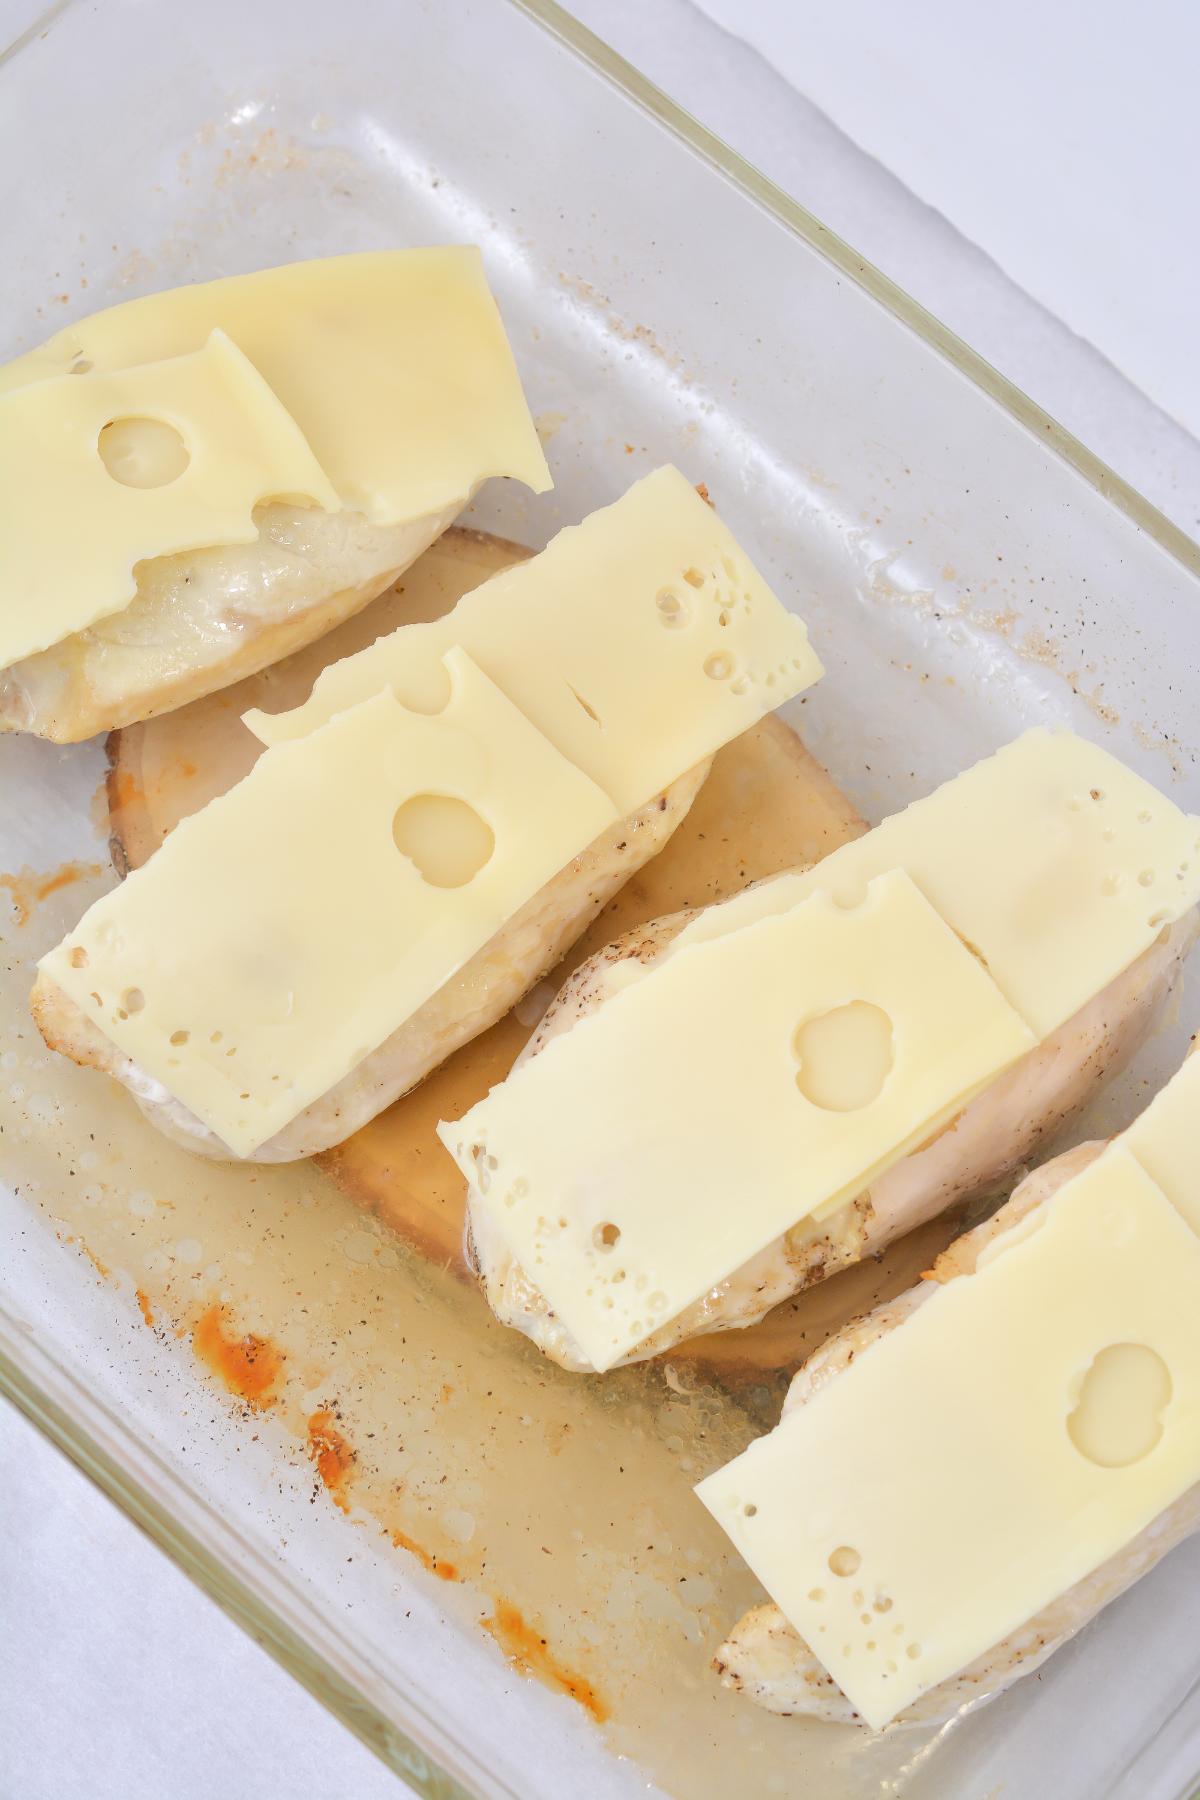 Four pieces of chicken breast in a baking dish topped with Swiss cheese.